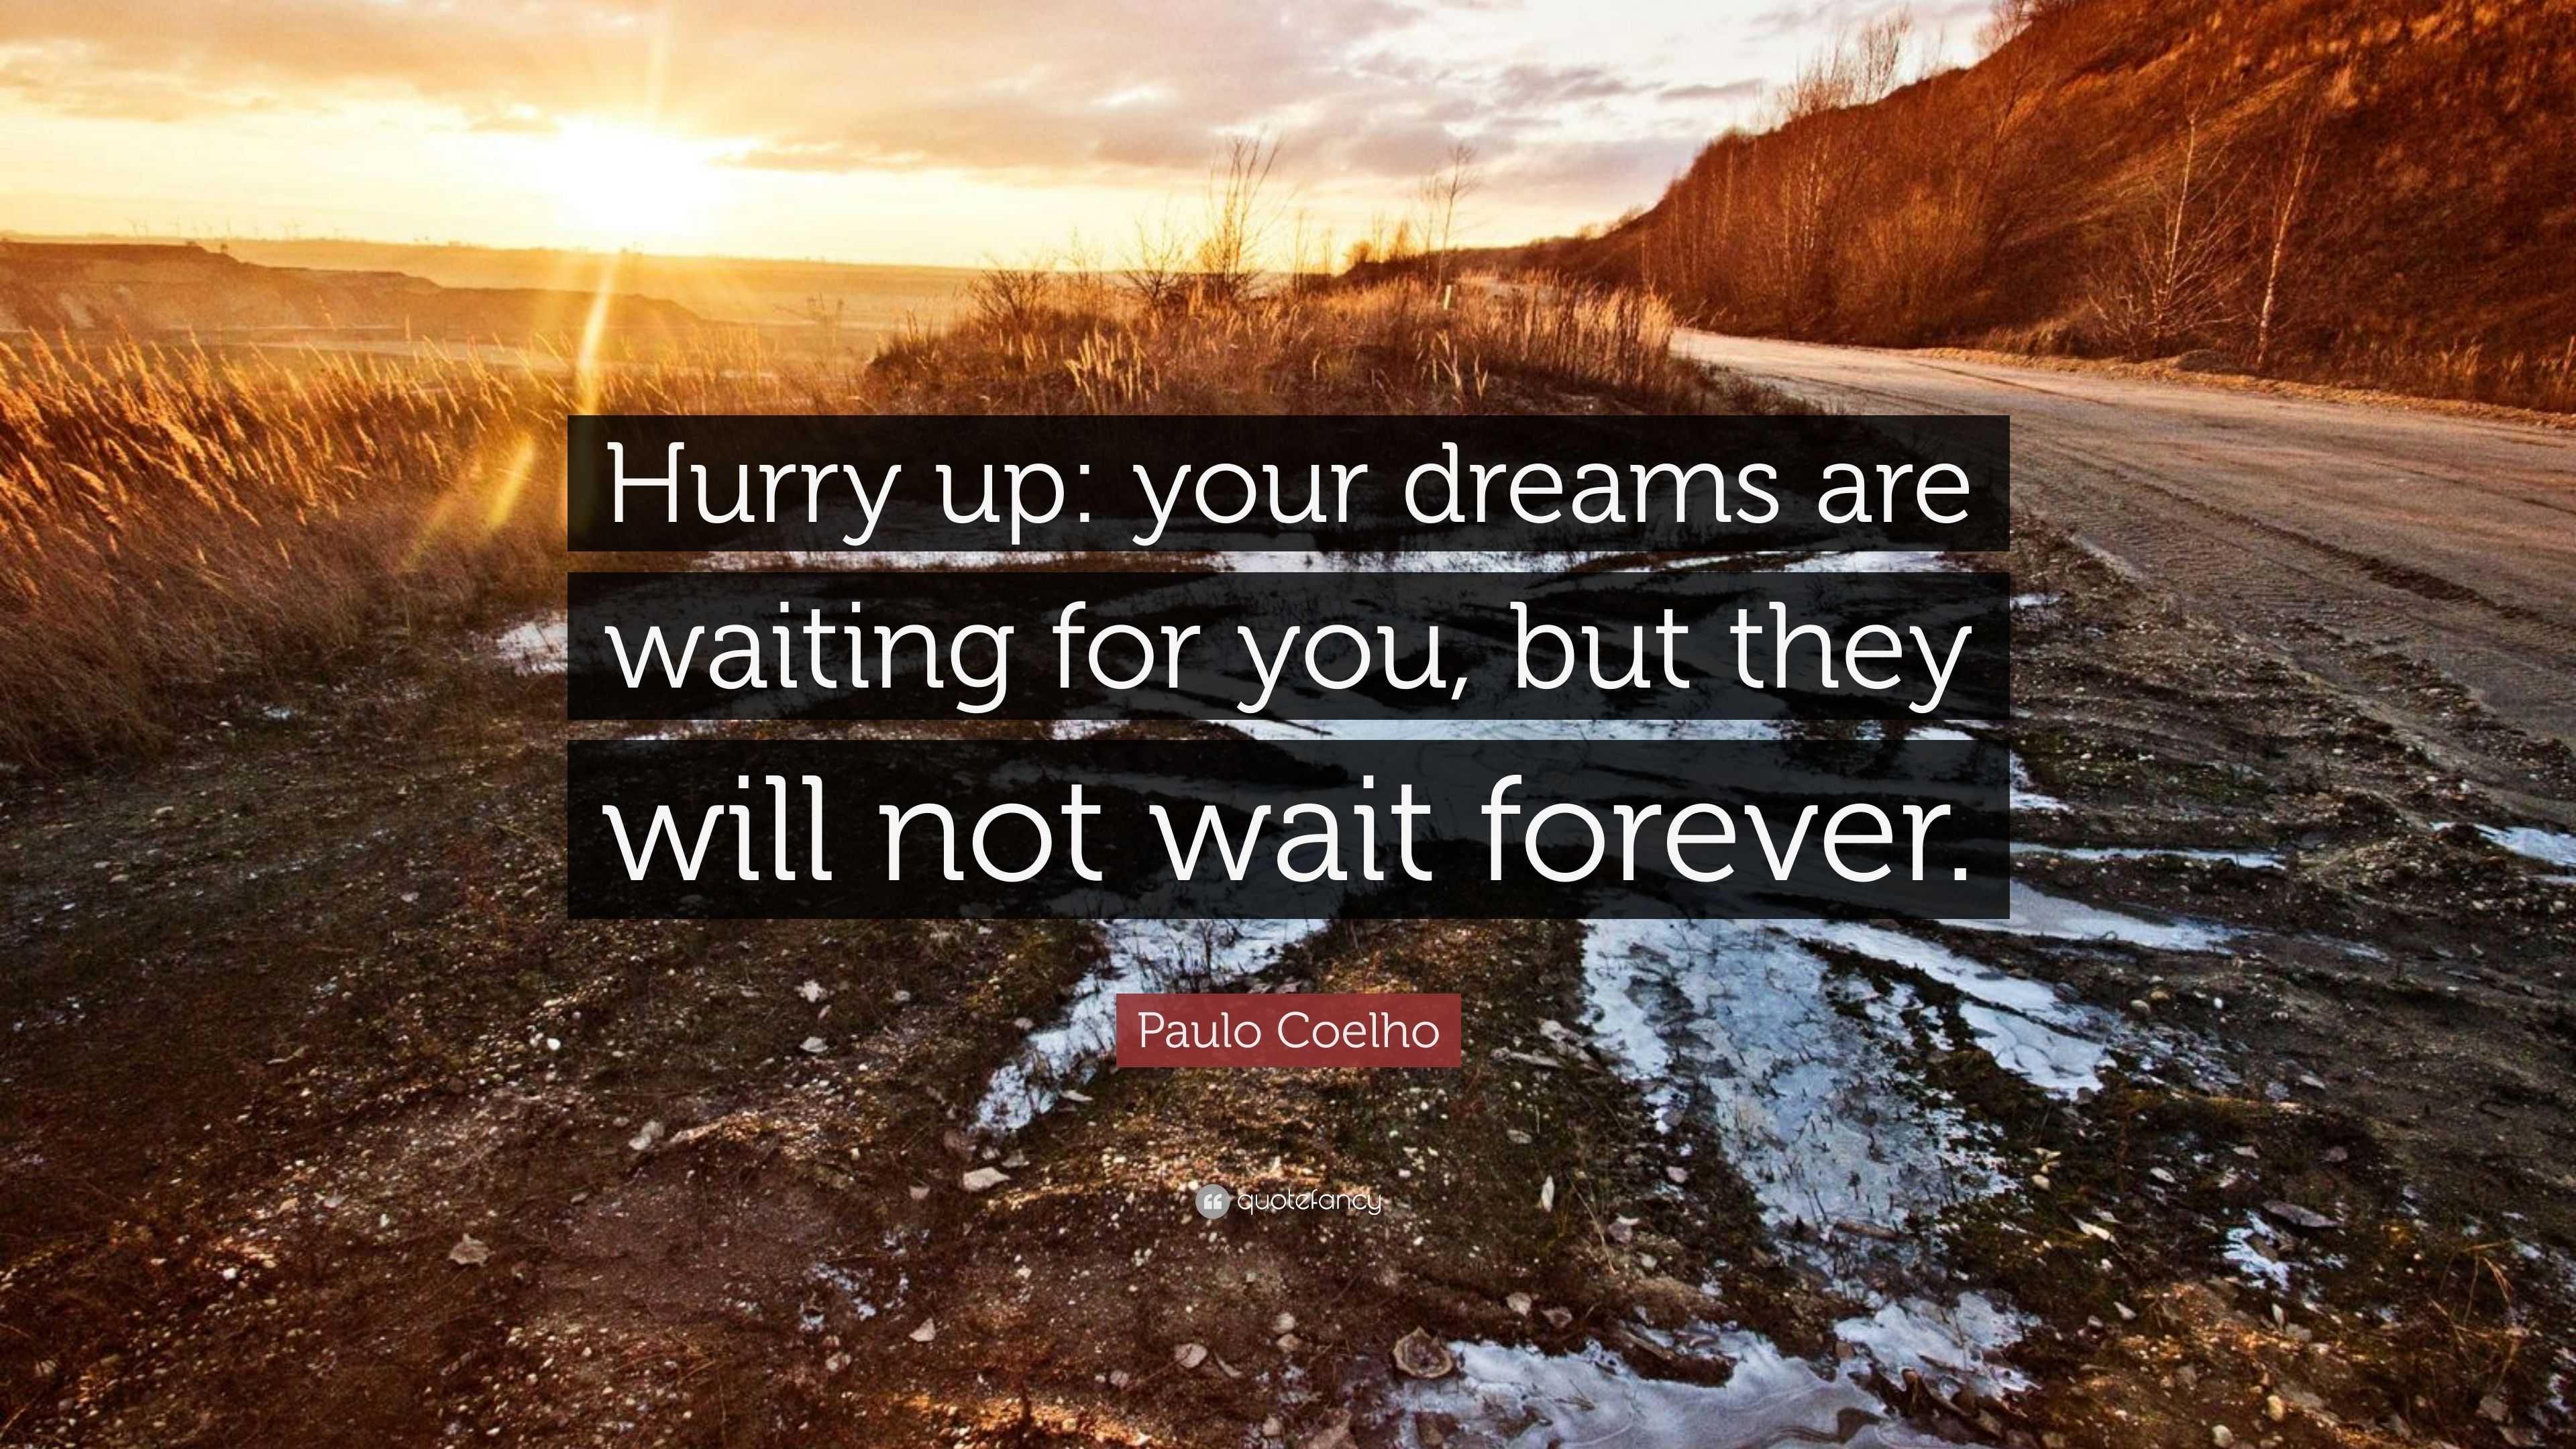 Paulo Coelho Quote “Hurry up your dreams are waiting for you but